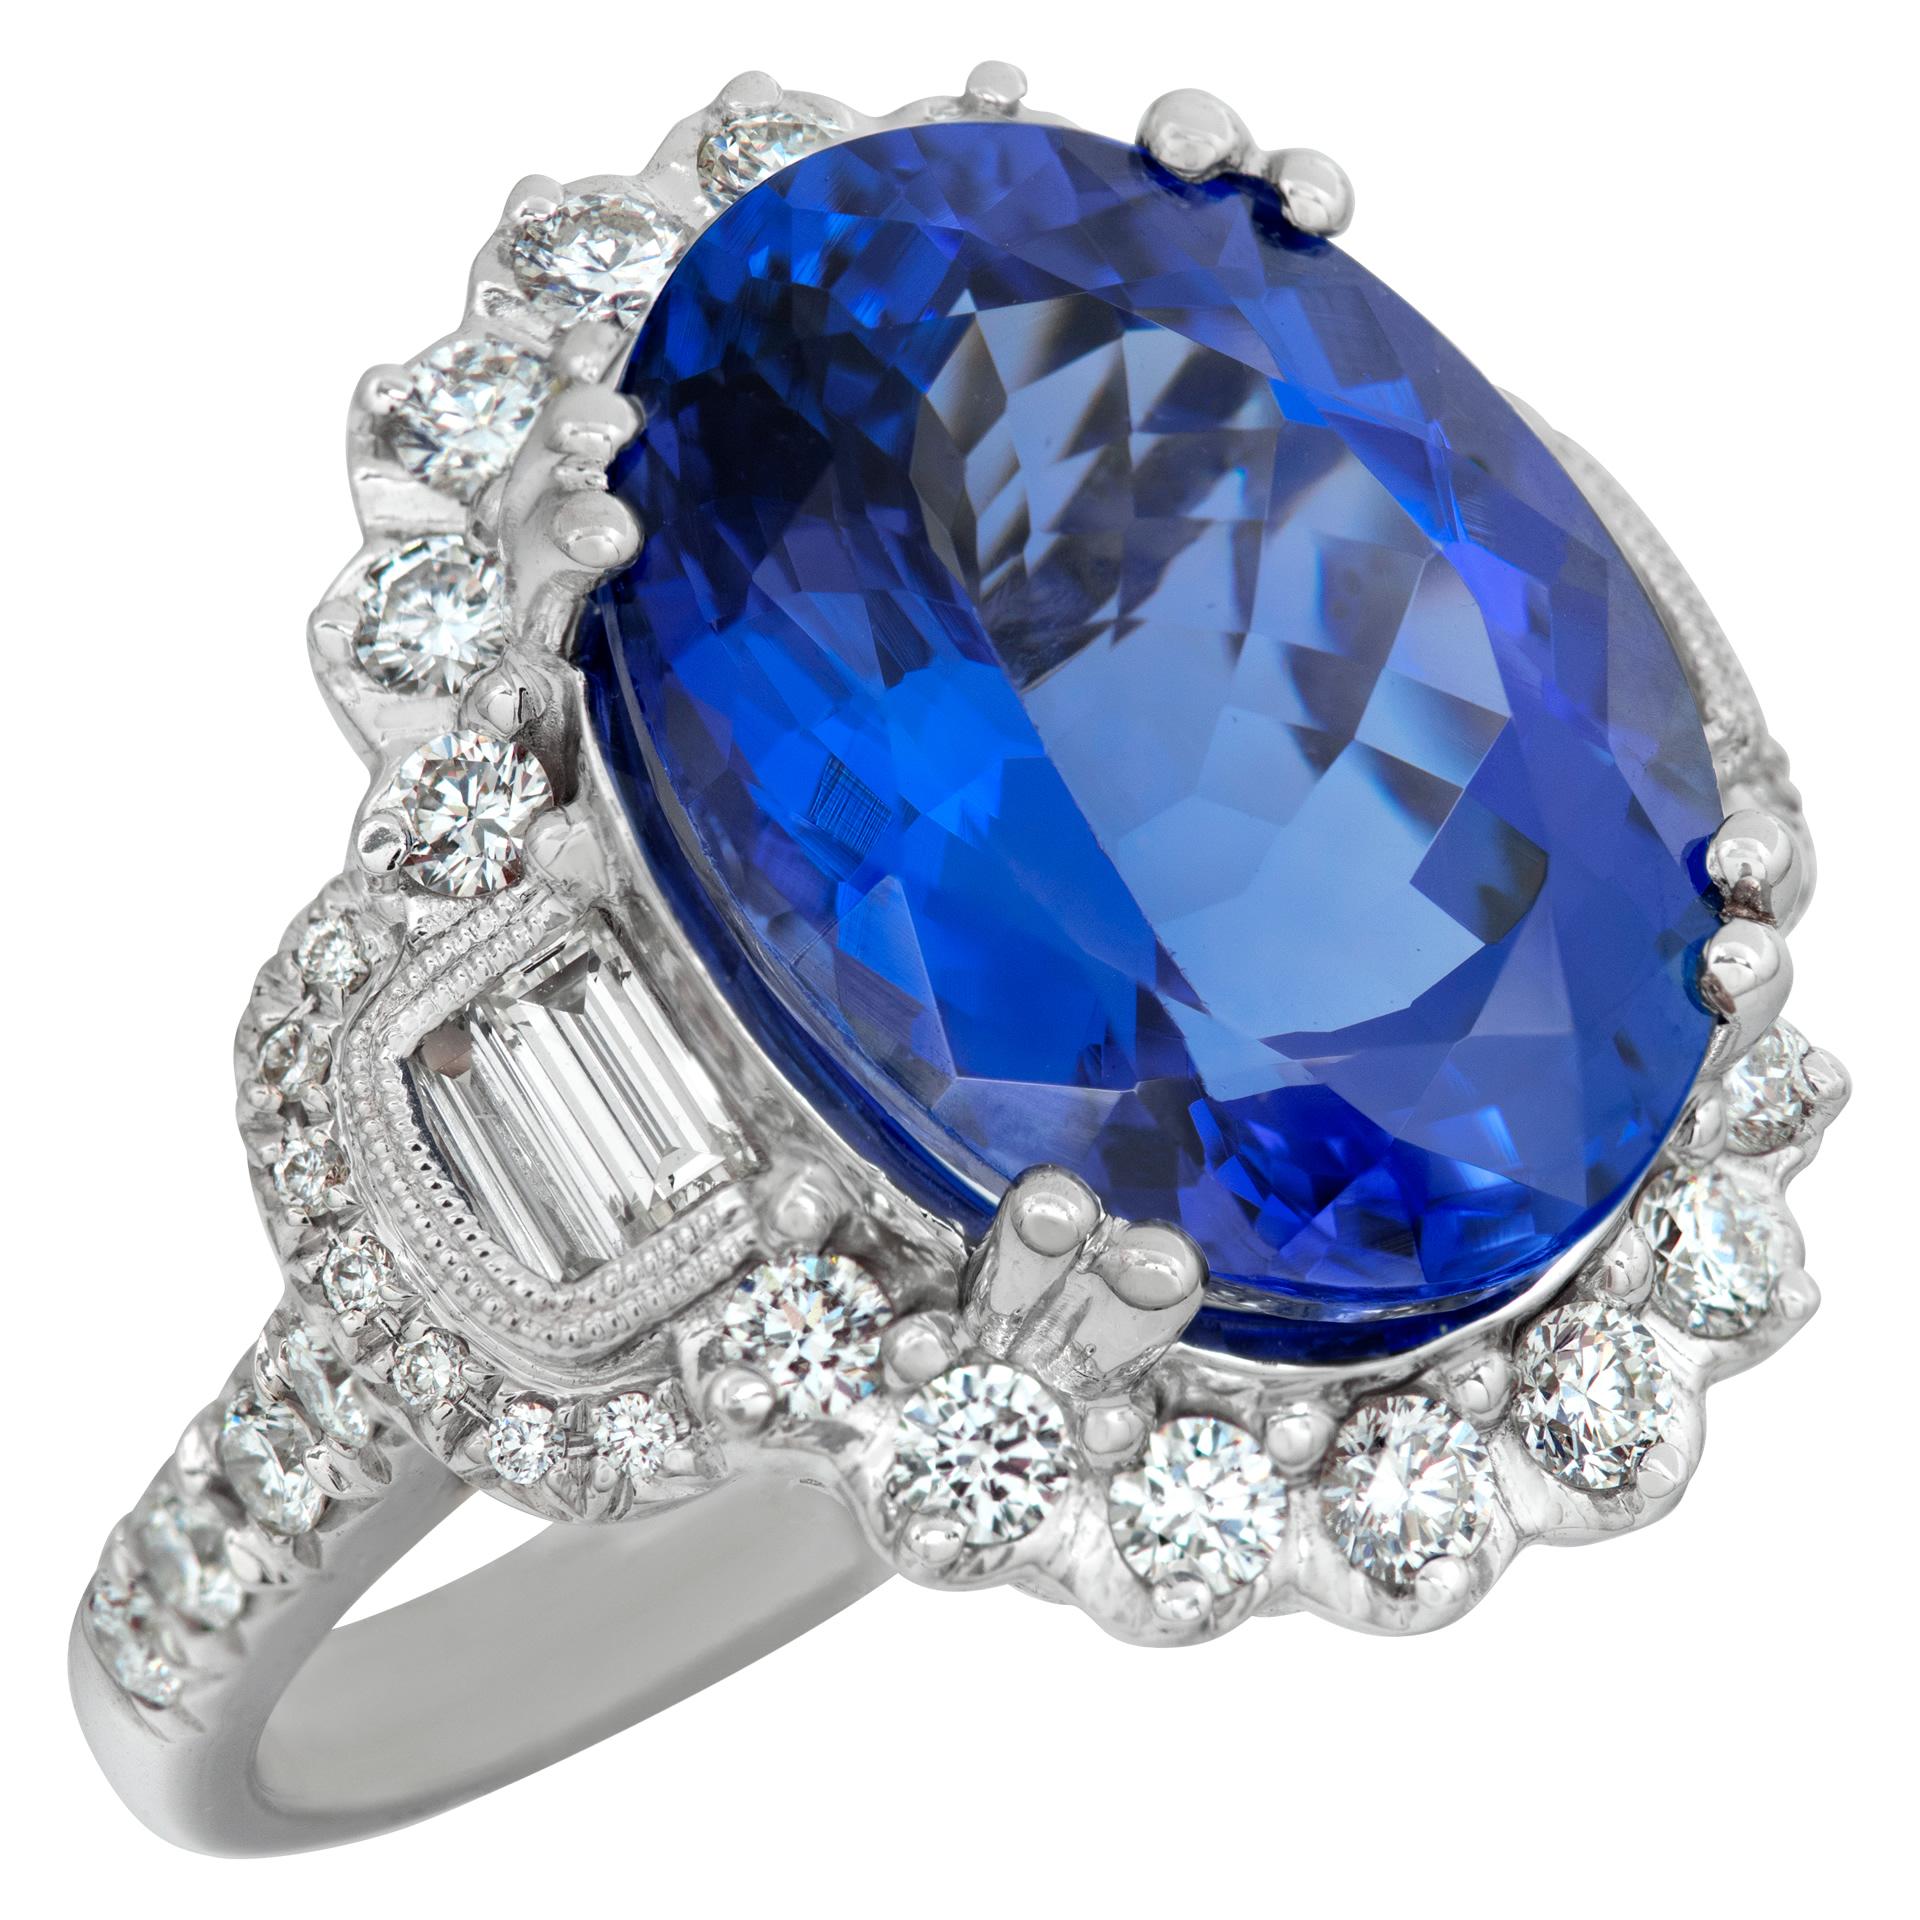 Tanzanite ring with diamonds in white gold with yellow gold accents In Excellent Condition For Sale In Surfside, FL